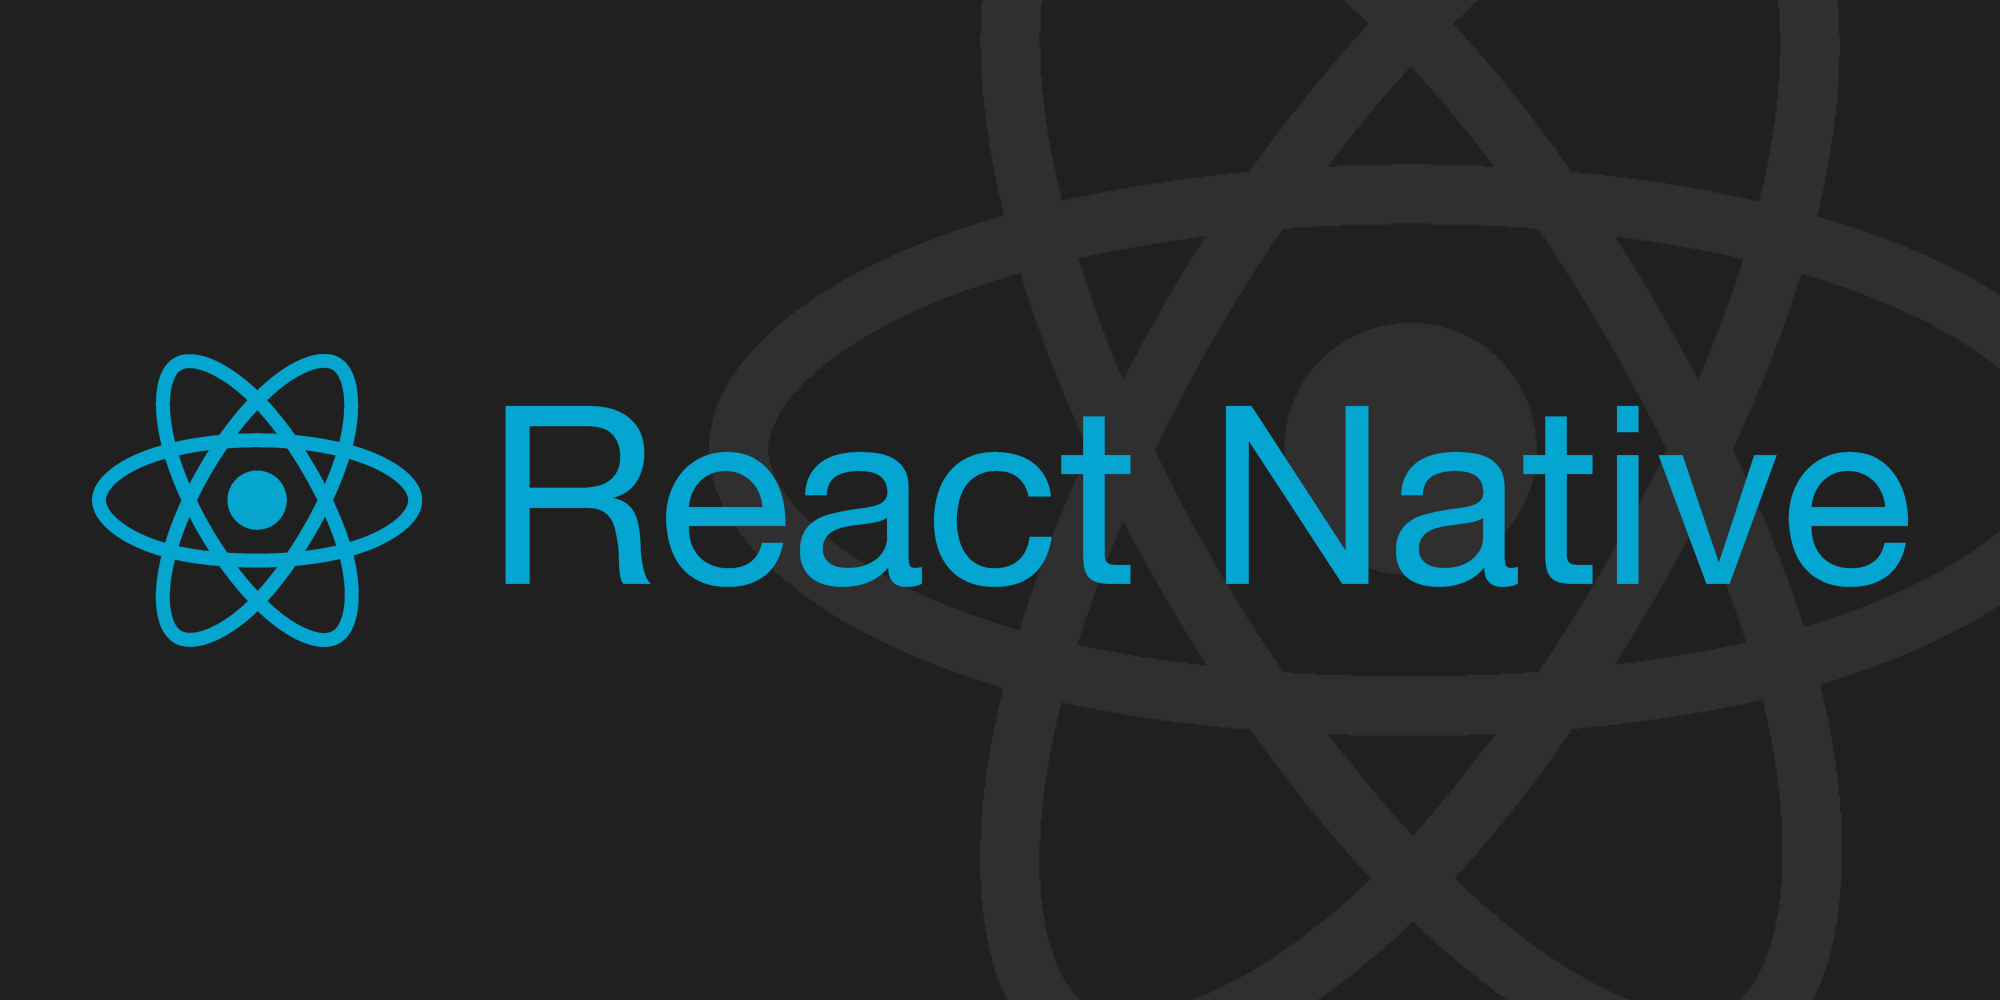 Debugging React Native Apps You Didn't Write